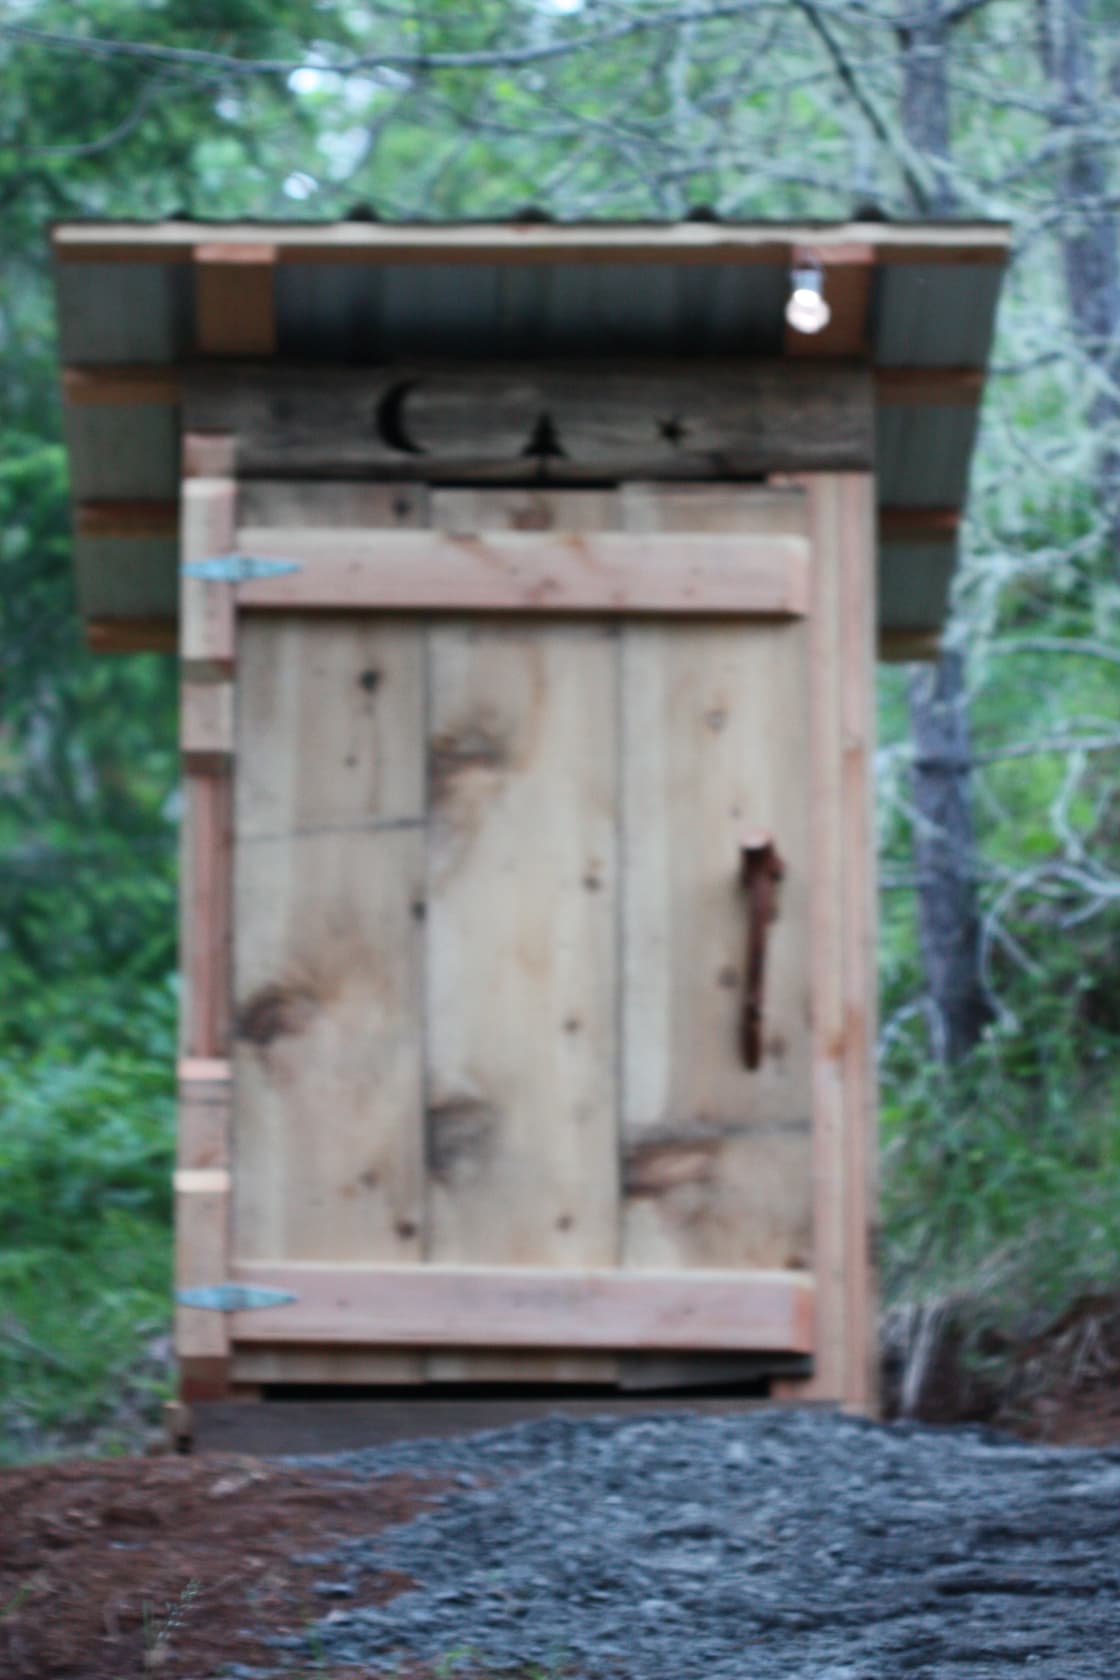 The outhouse is located between two sites.